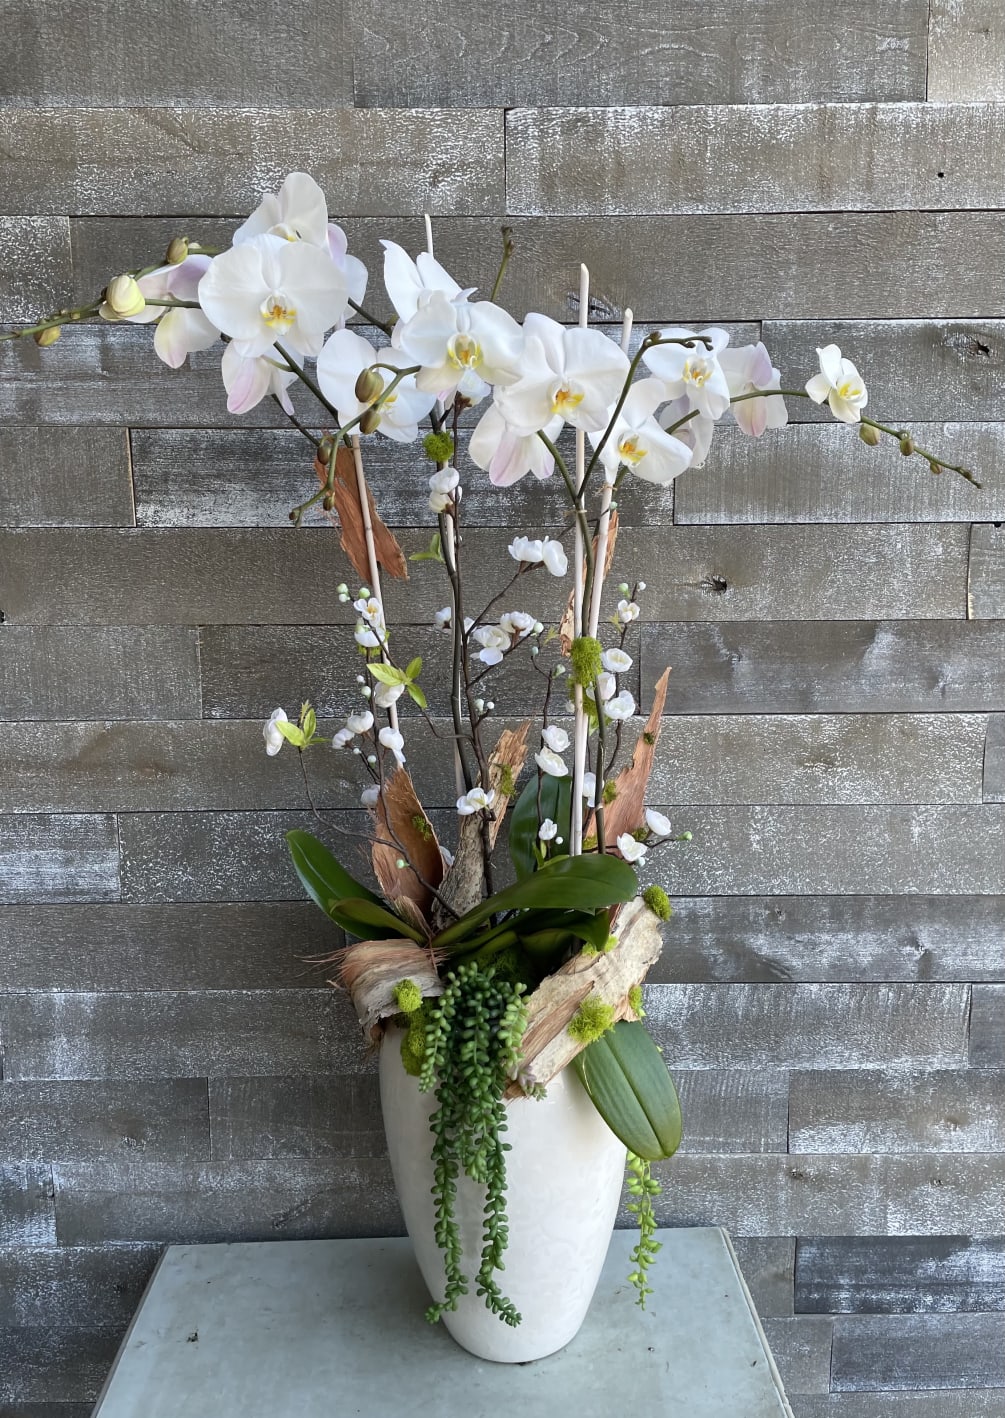 Full gorgeous double phalaenopsis plants incorporated into a tallwhite ceramic Japanese inspired